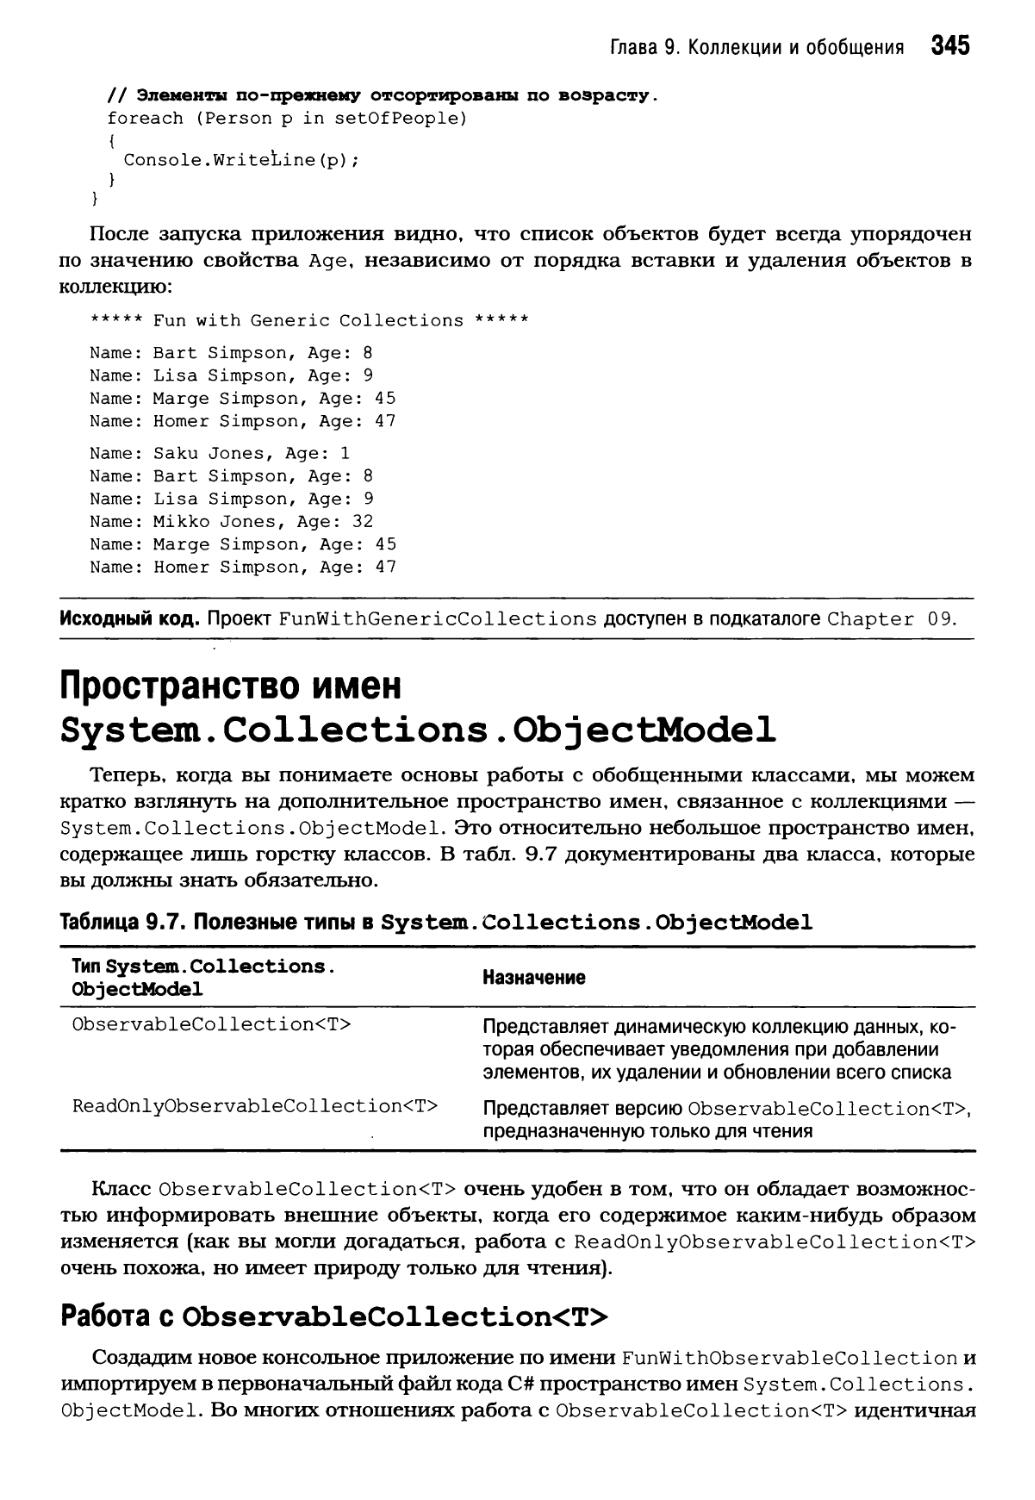 Пространство имен System.Collections.ObjectModel